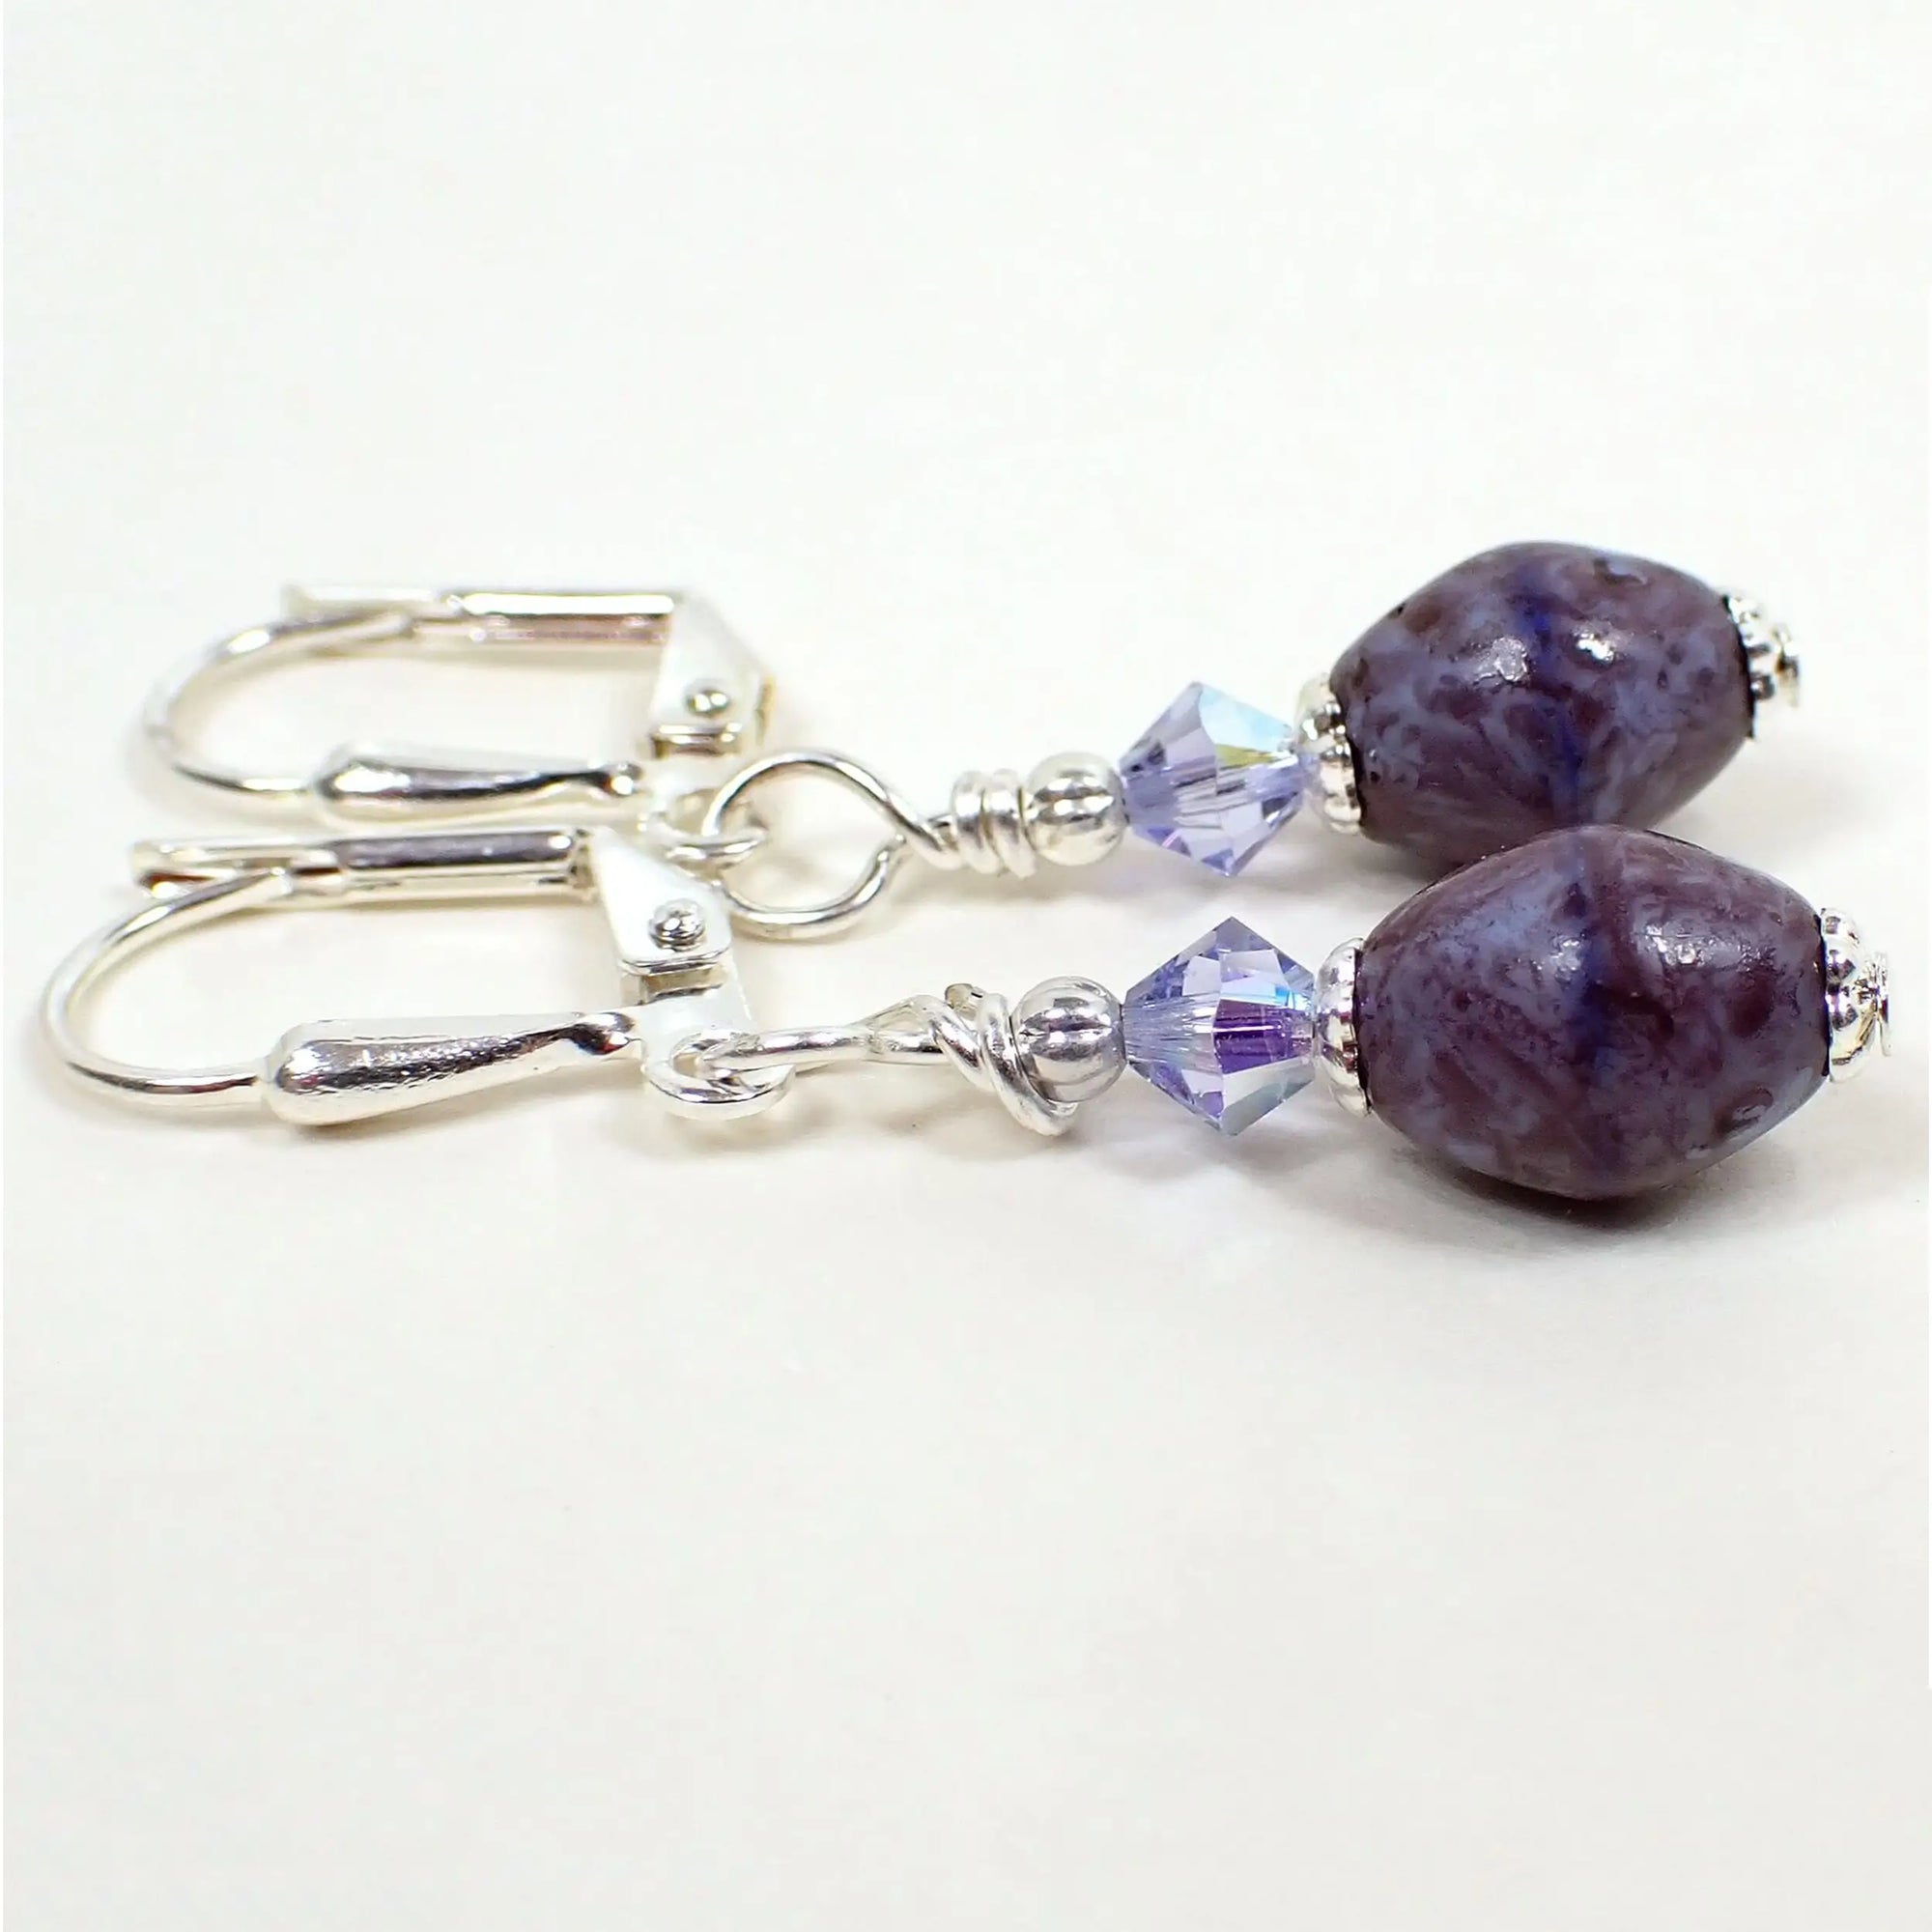 Side view of the small handmade drop earrings. The metal is silver plated in color. There are small faceted glass crystal beads at the top in a light purple color. The bottom beads are oval Czech glass beads and have mottled shades of purple and dark purple.